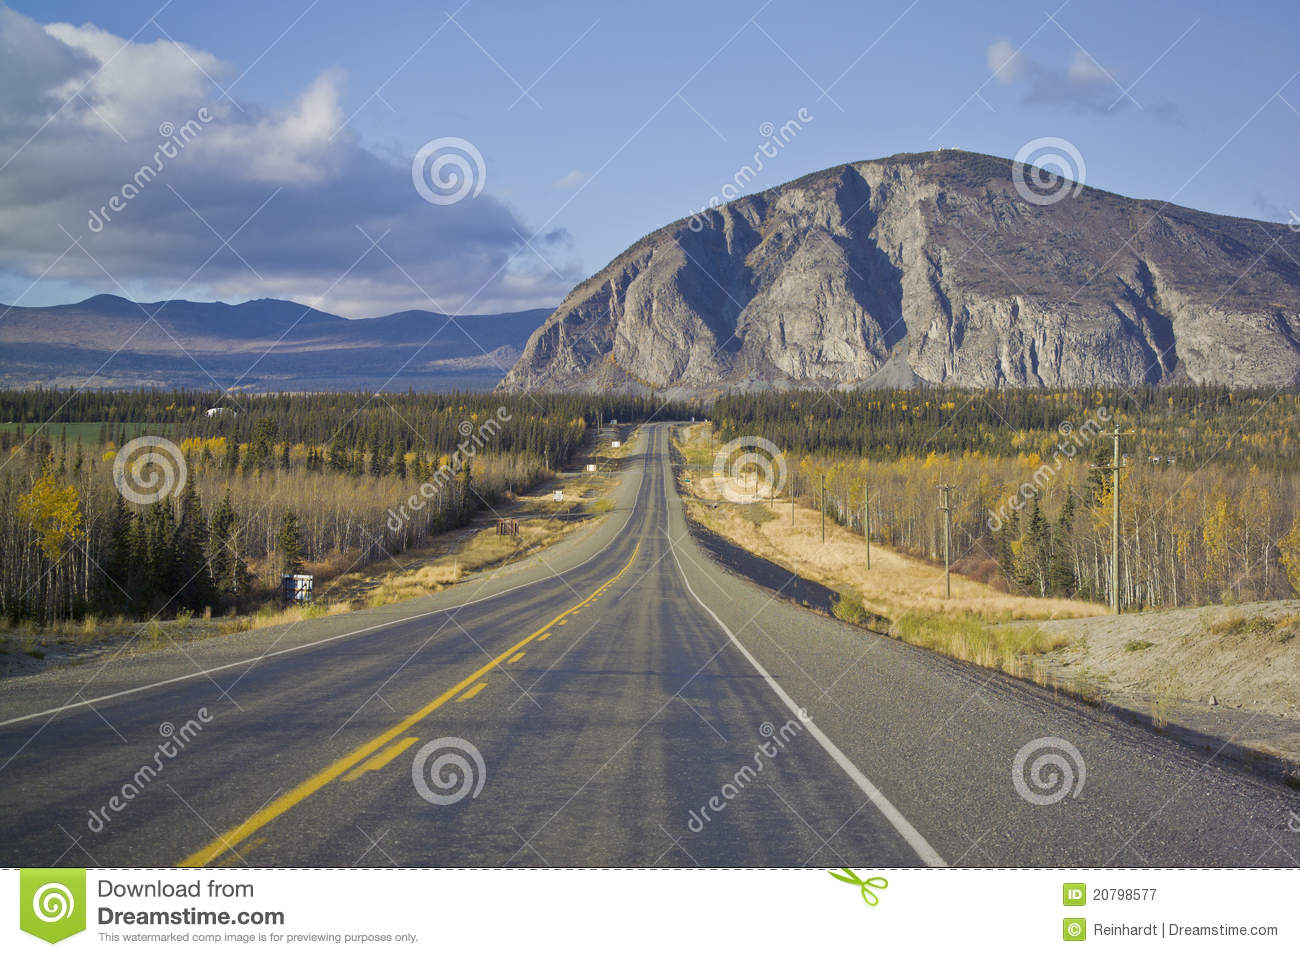 Alaska Highway Near Haines Junction Royalty Free Stock Photography.